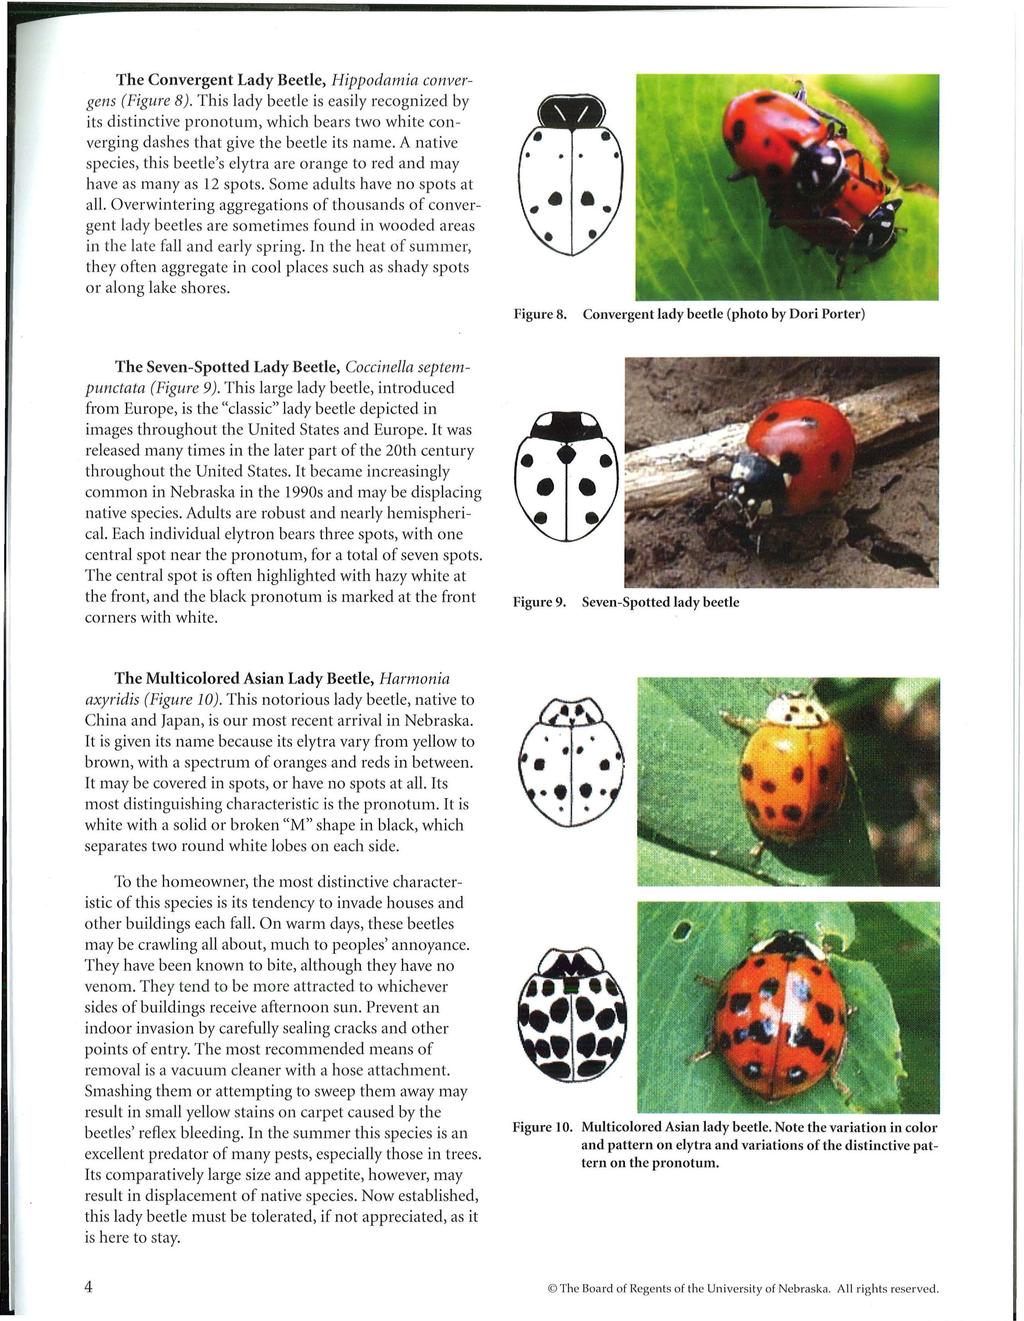 The Convergent Lady Beetle, Hippodamia convergens (Figure 8). This lady beetle is easily recognized by its distinctive pronotum, which bears two white converging dashes that give the beetle its name.